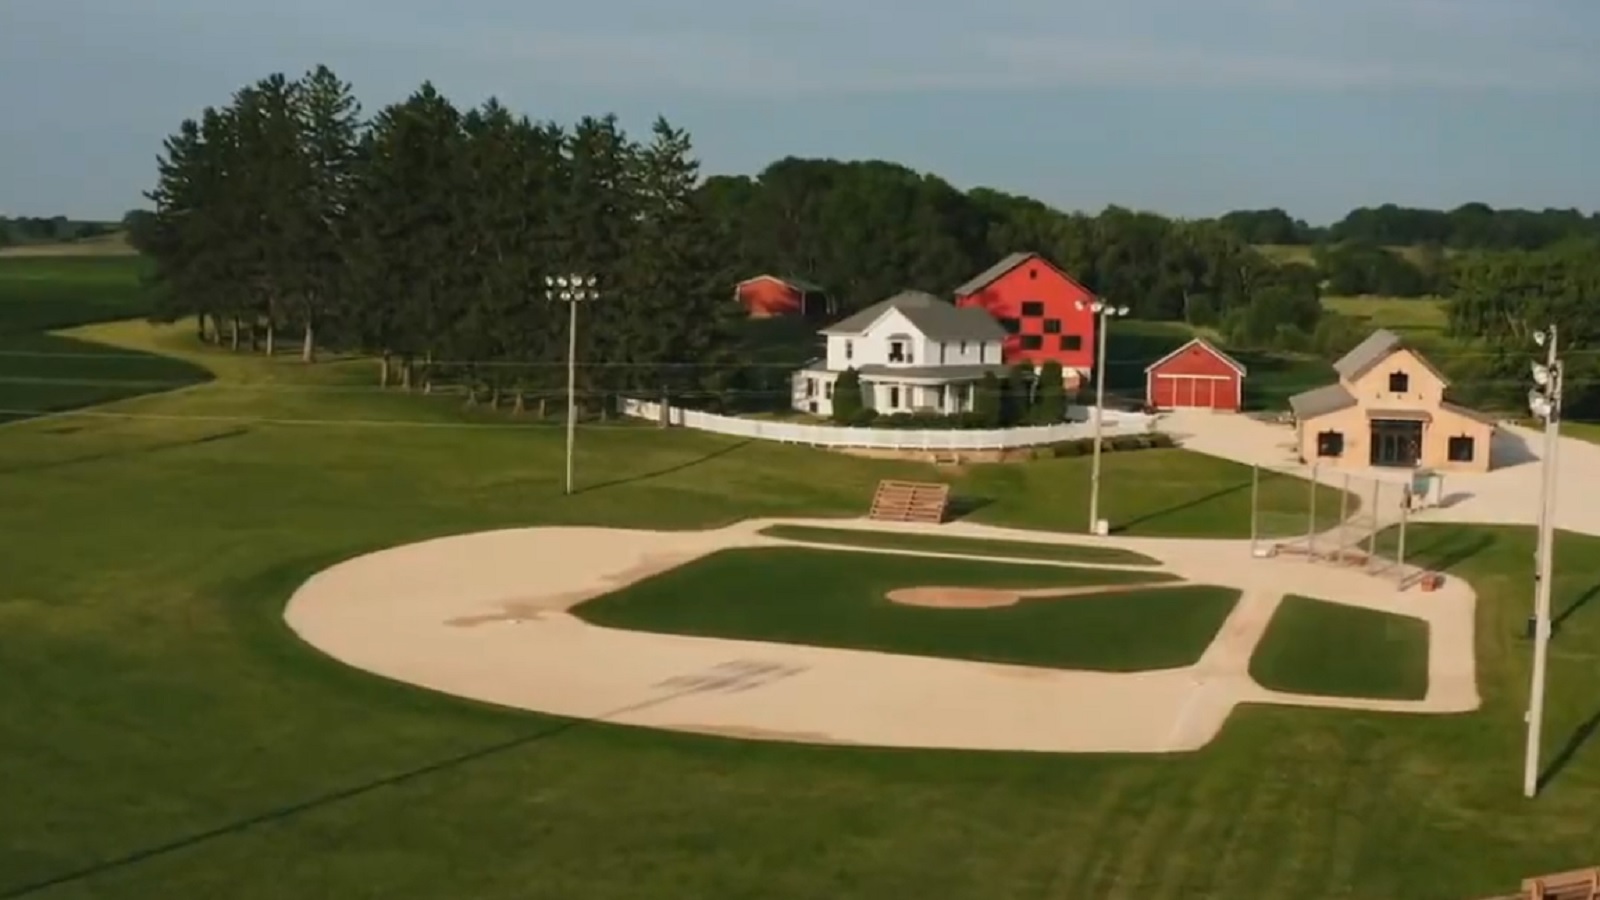 Is there a Field of Dreams Game in 2023 MLB season? – NBC Sports